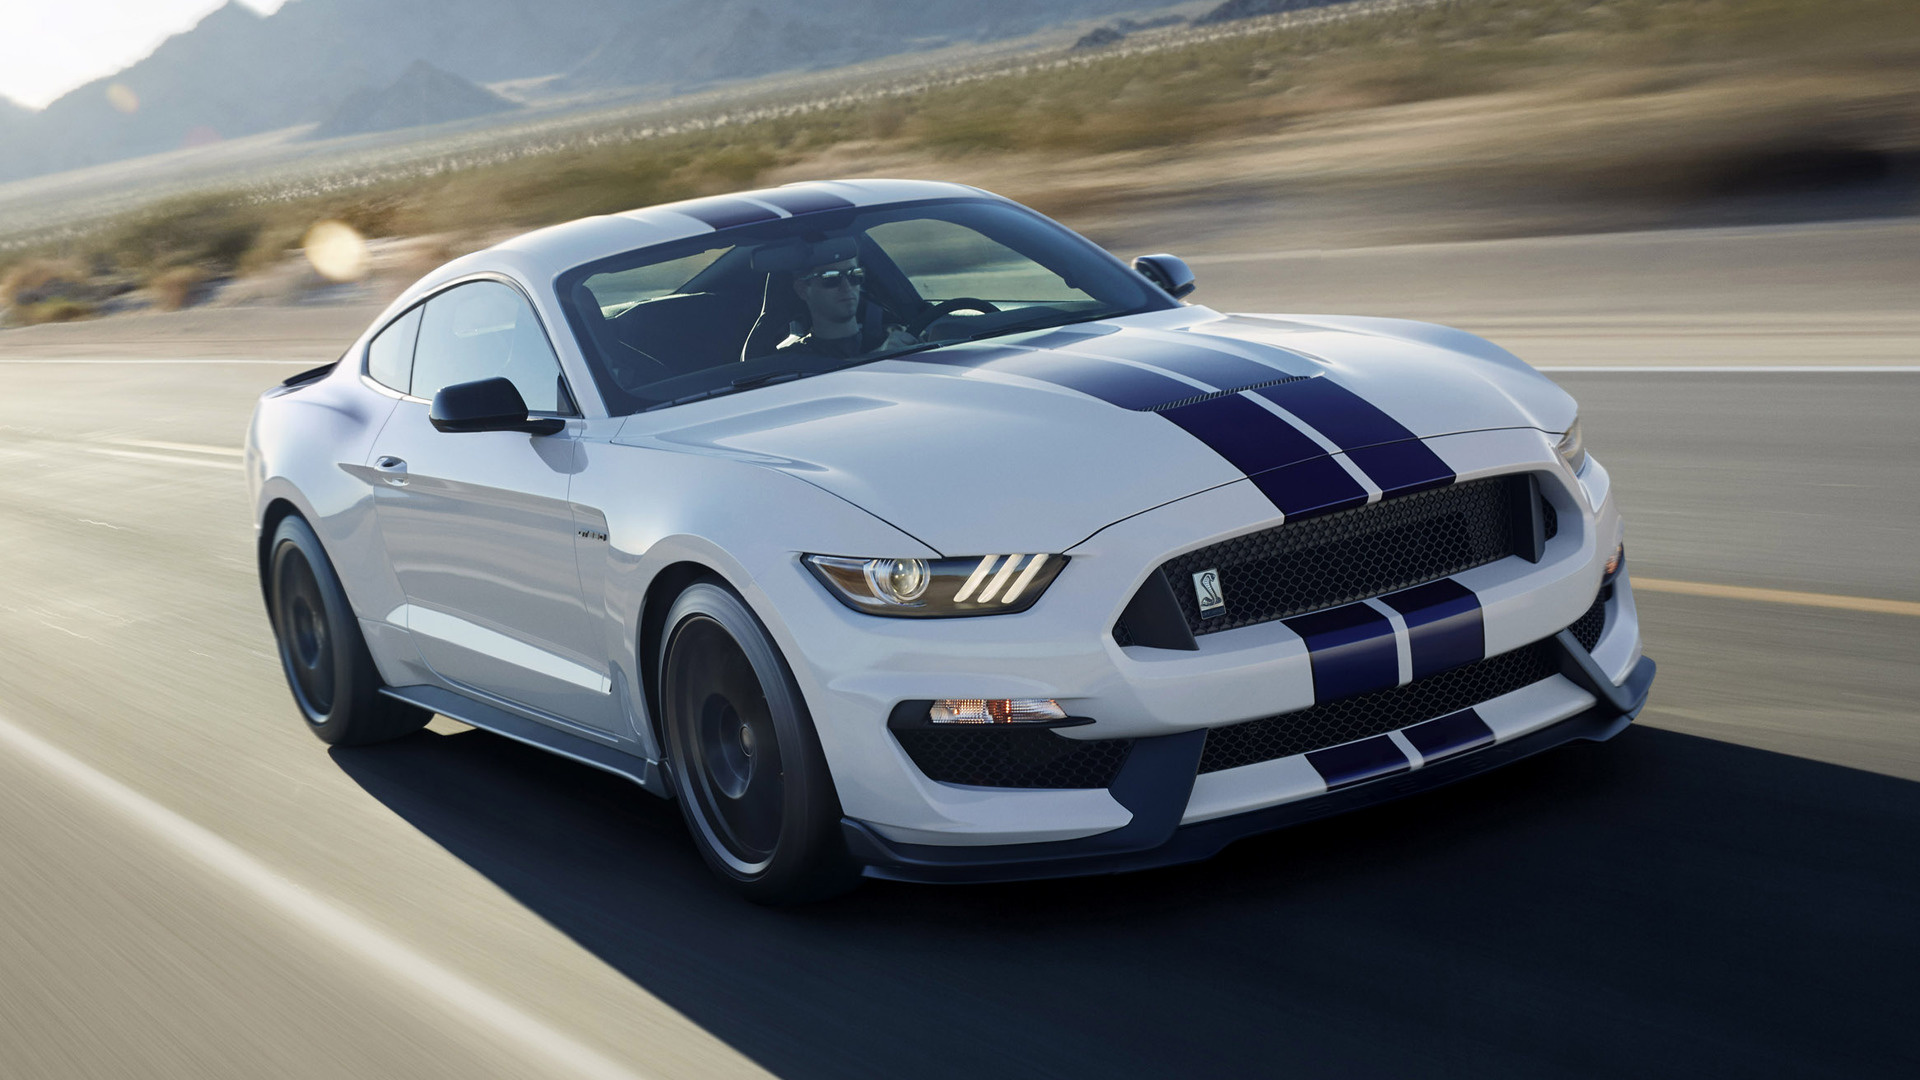 Shelby GT350 Mustang 2016 Wallpapers and HD Images   Car 1920x1080